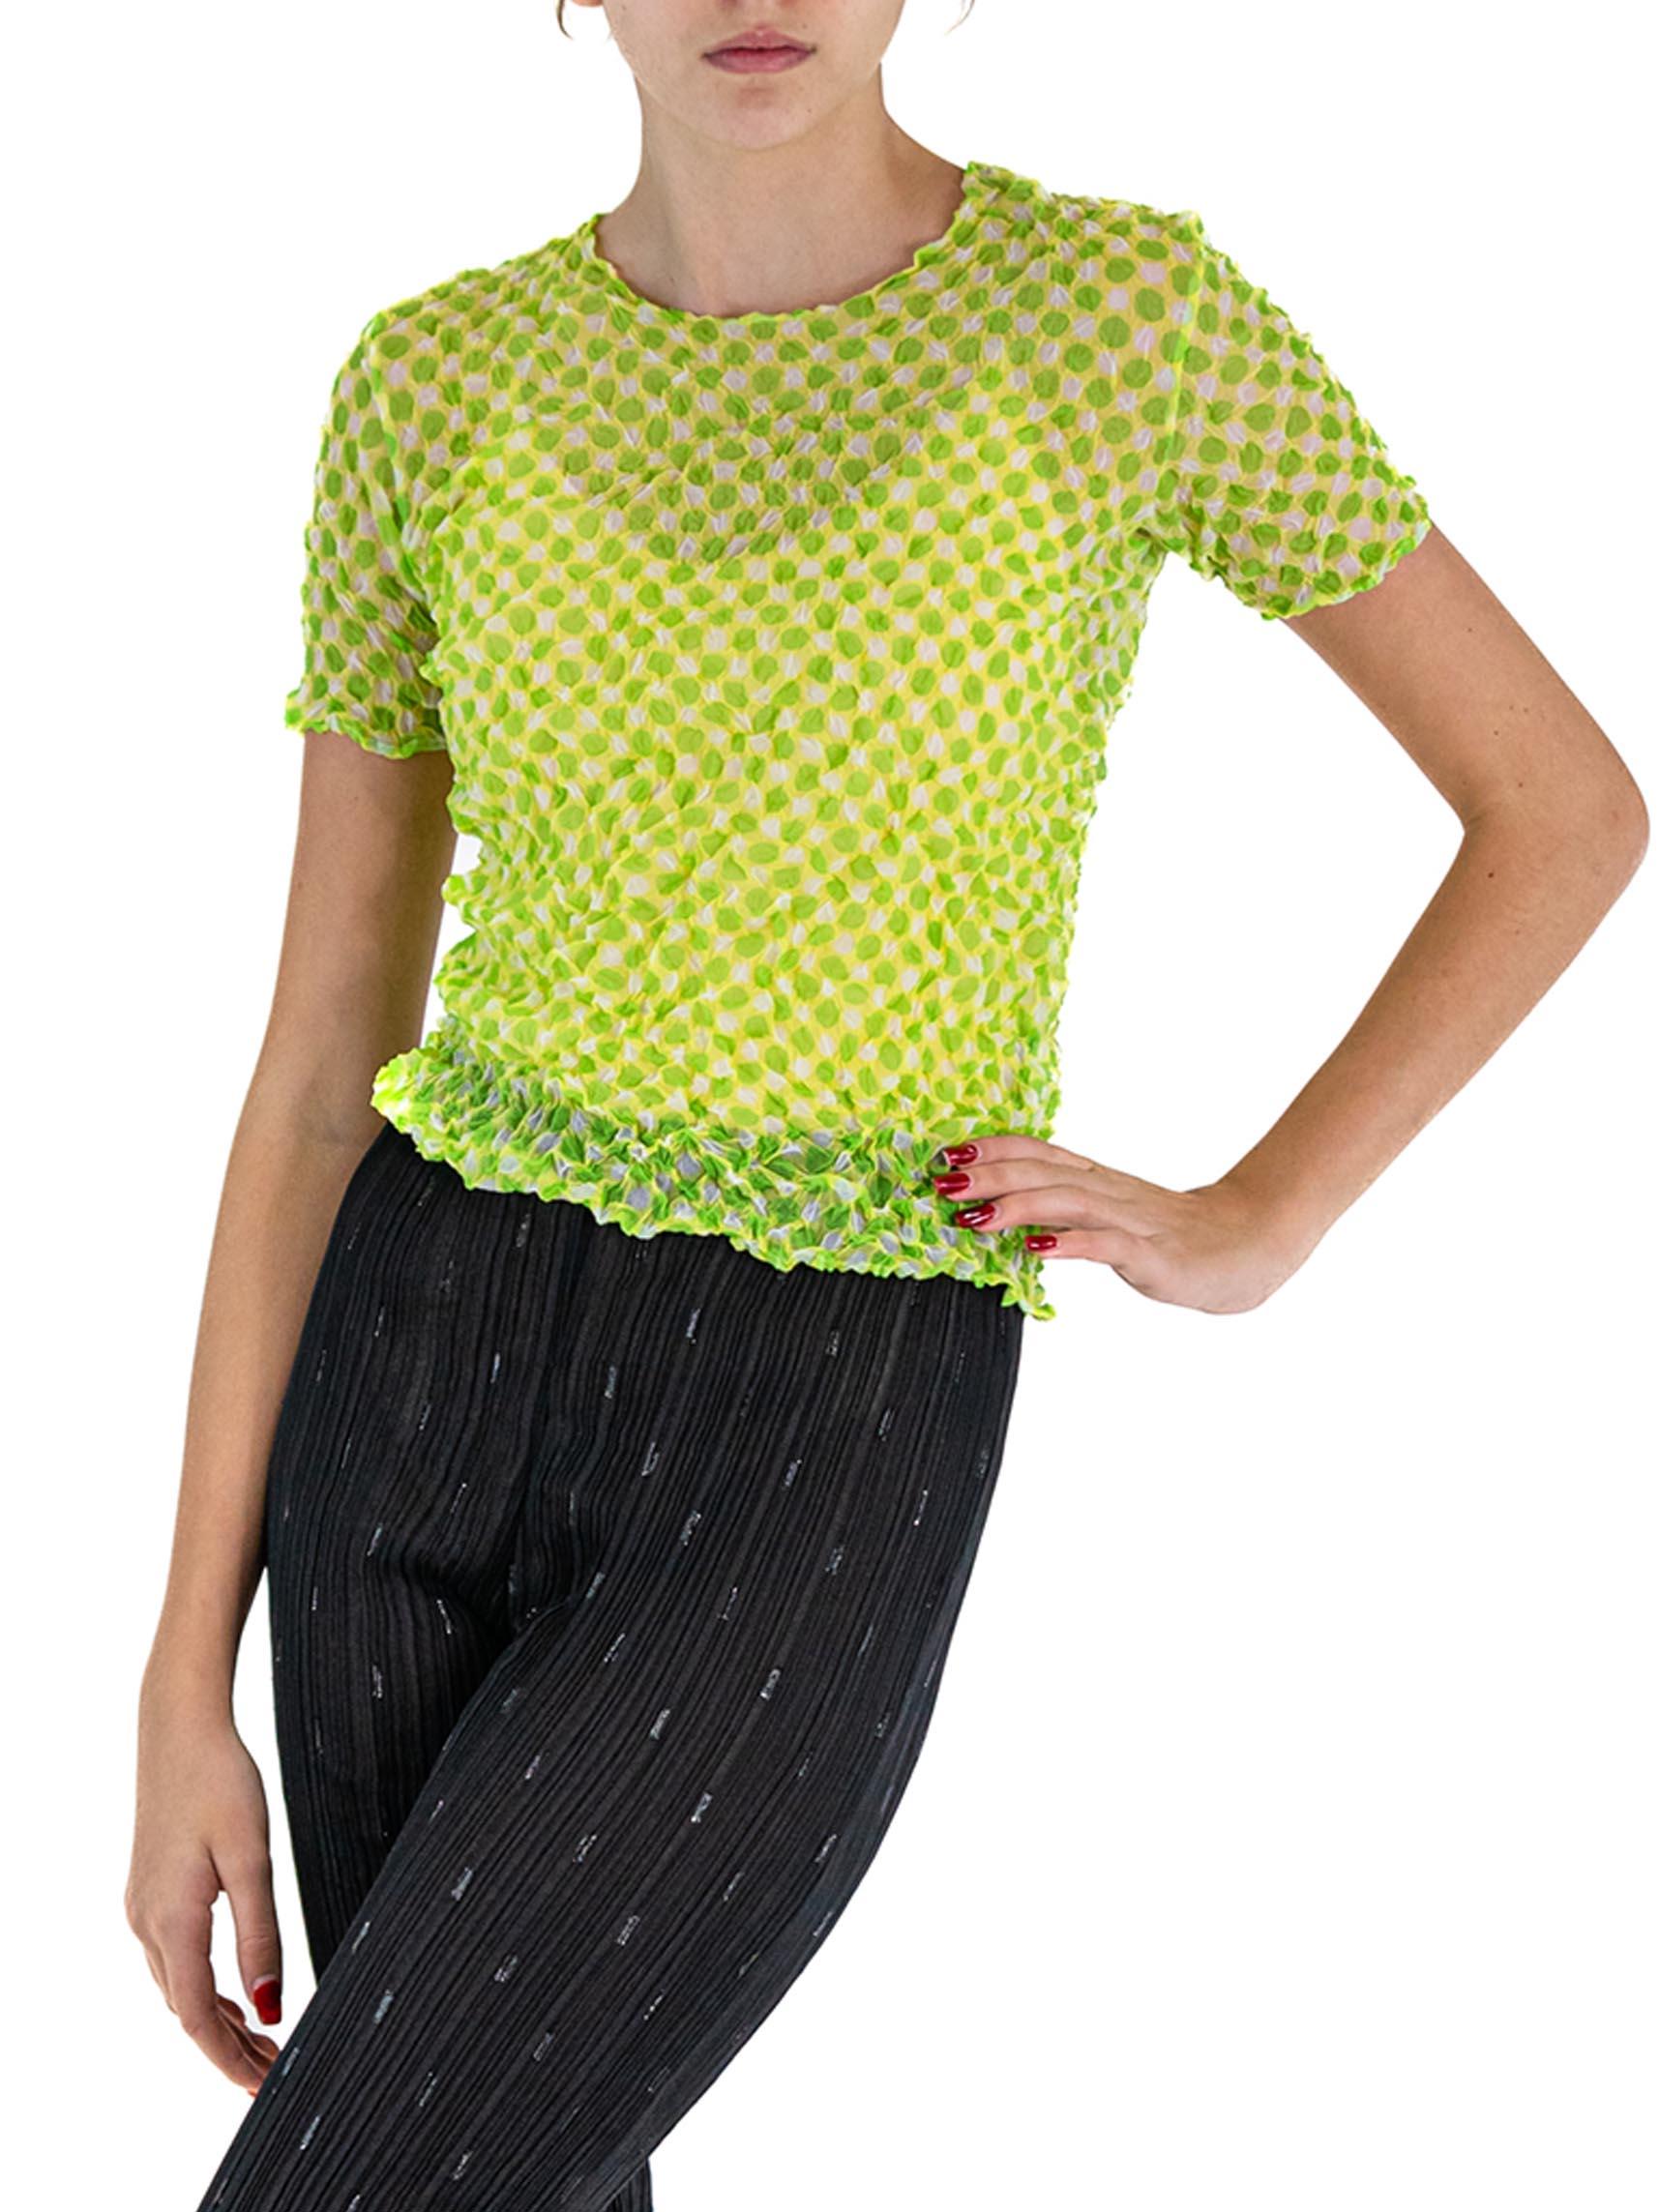 1990S ISSEY MIYAKE Lime Green Sheer Polyester Shrink Wrap Top With Polka Dots In Excellent Condition For Sale In New York, NY